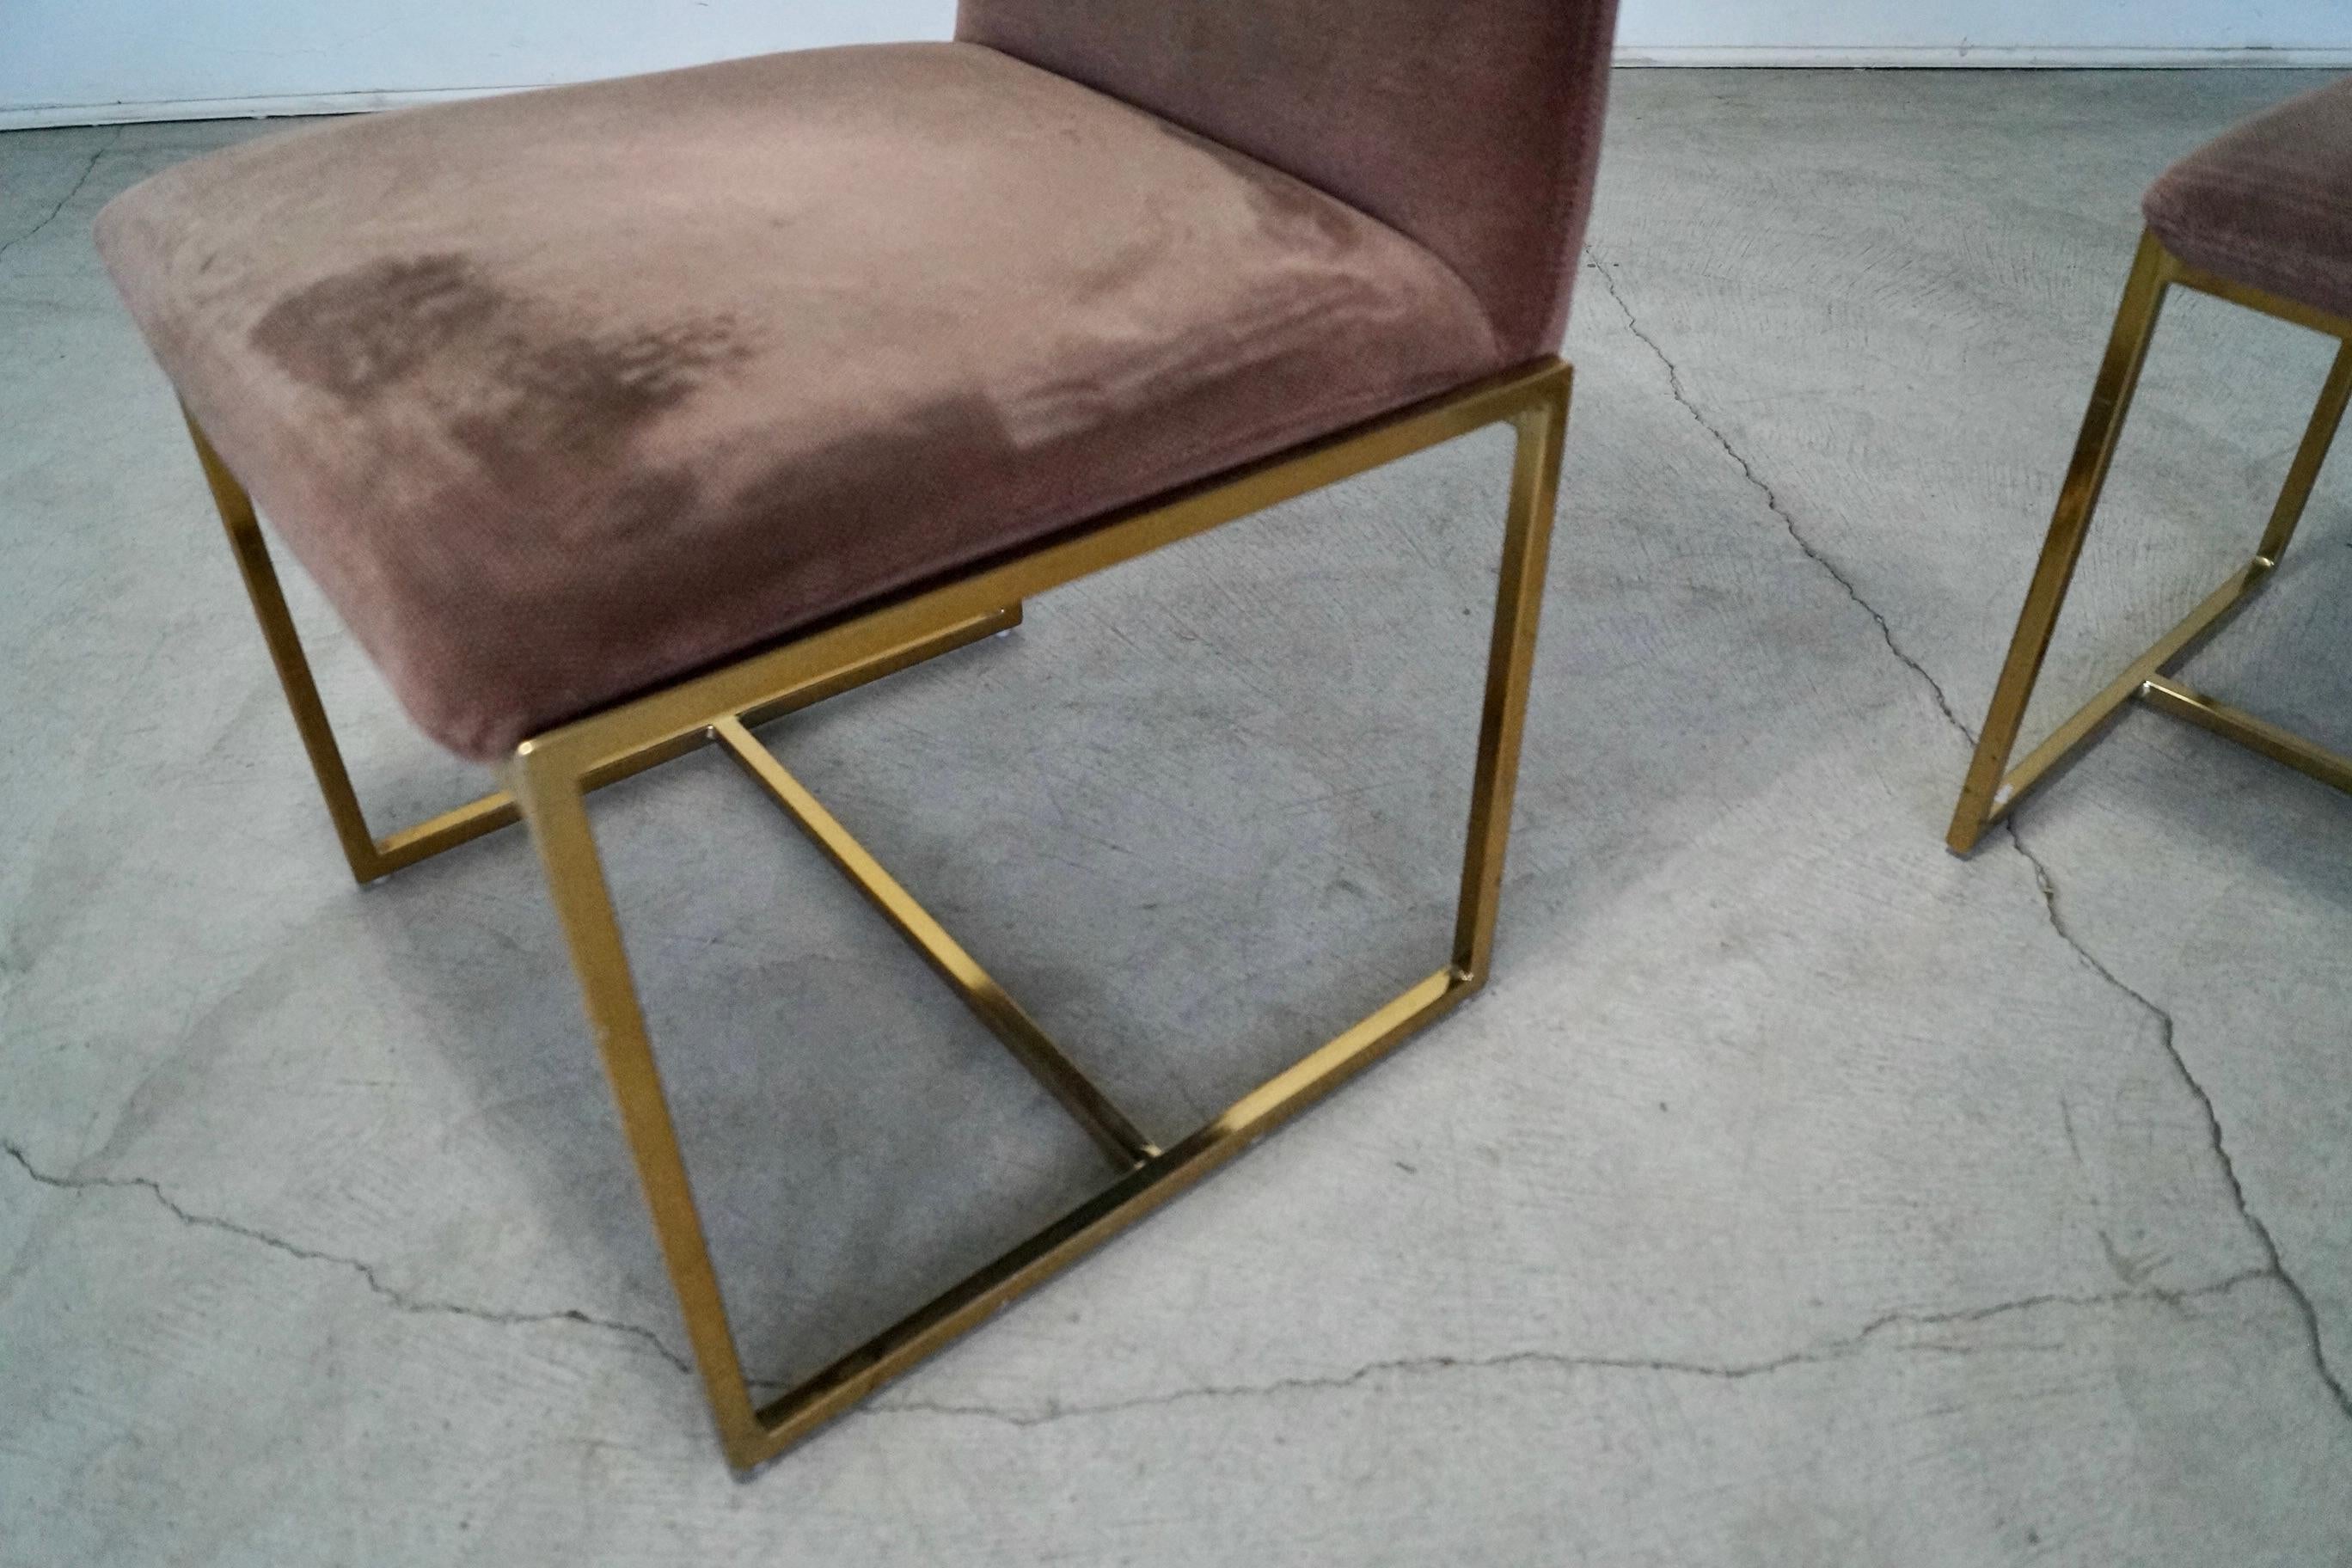 1970's Mid-Century Modern Milo Baughman Style Brass Dining Chairs - a Pair For Sale 13